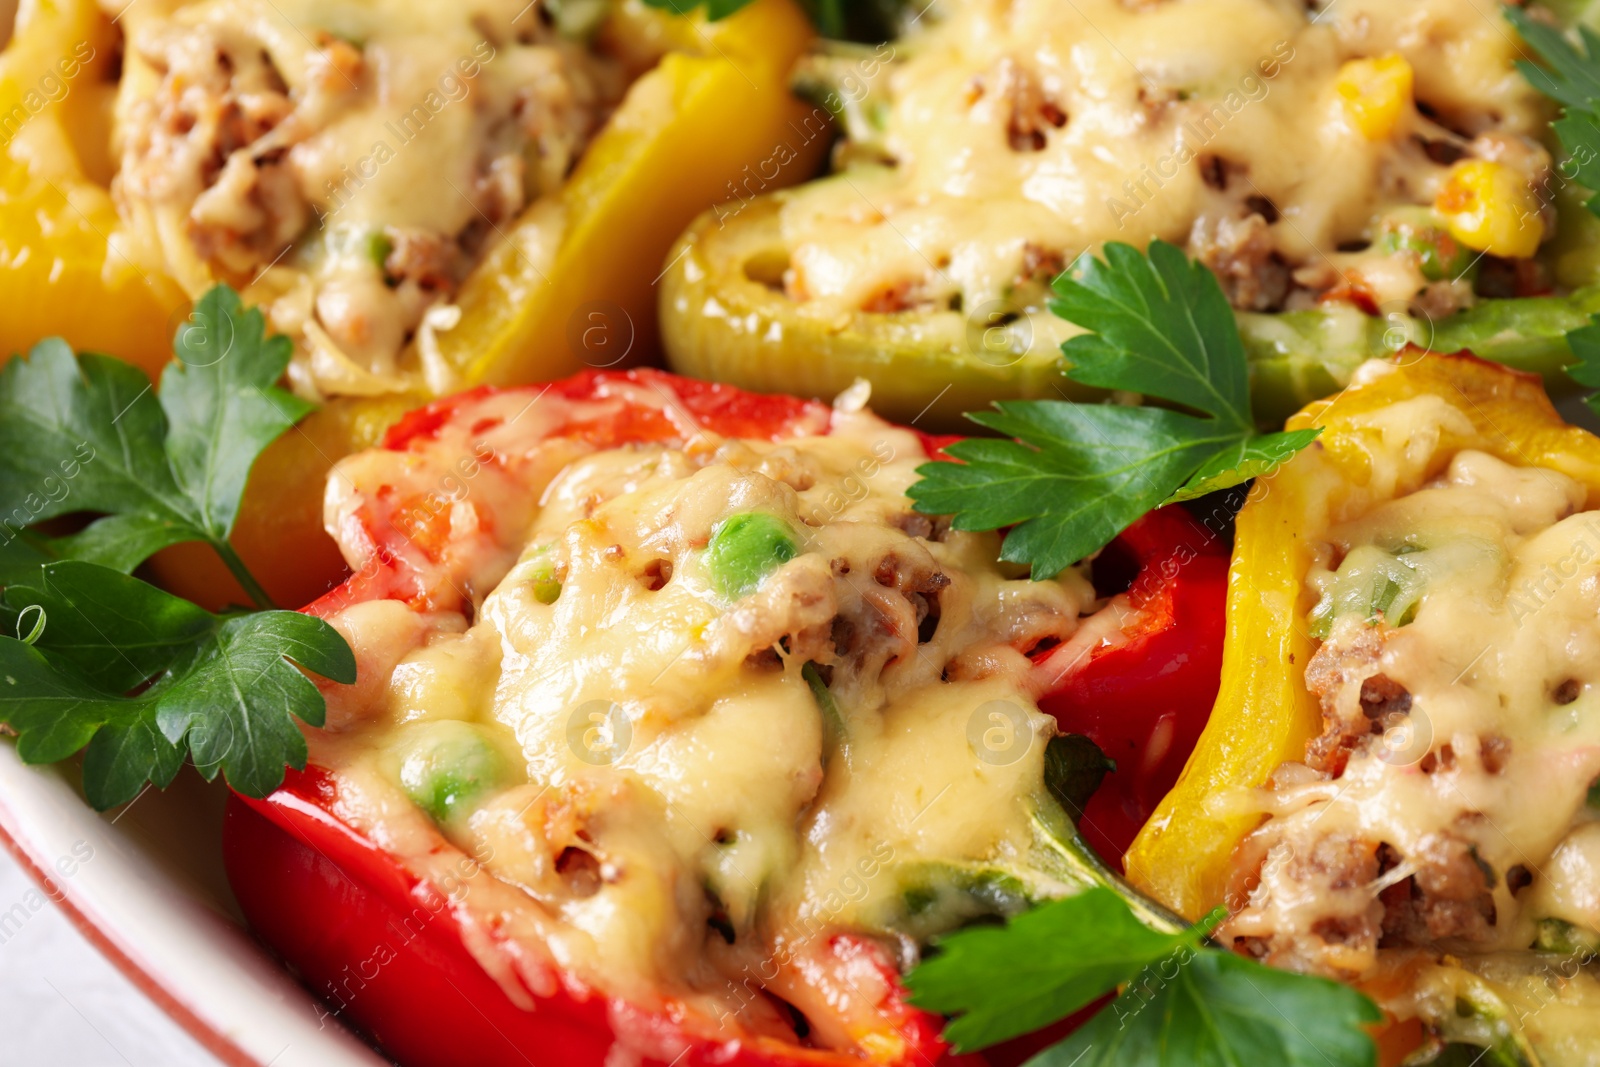 Photo of Tasty stuffed bell peppers in baking dish, closeup